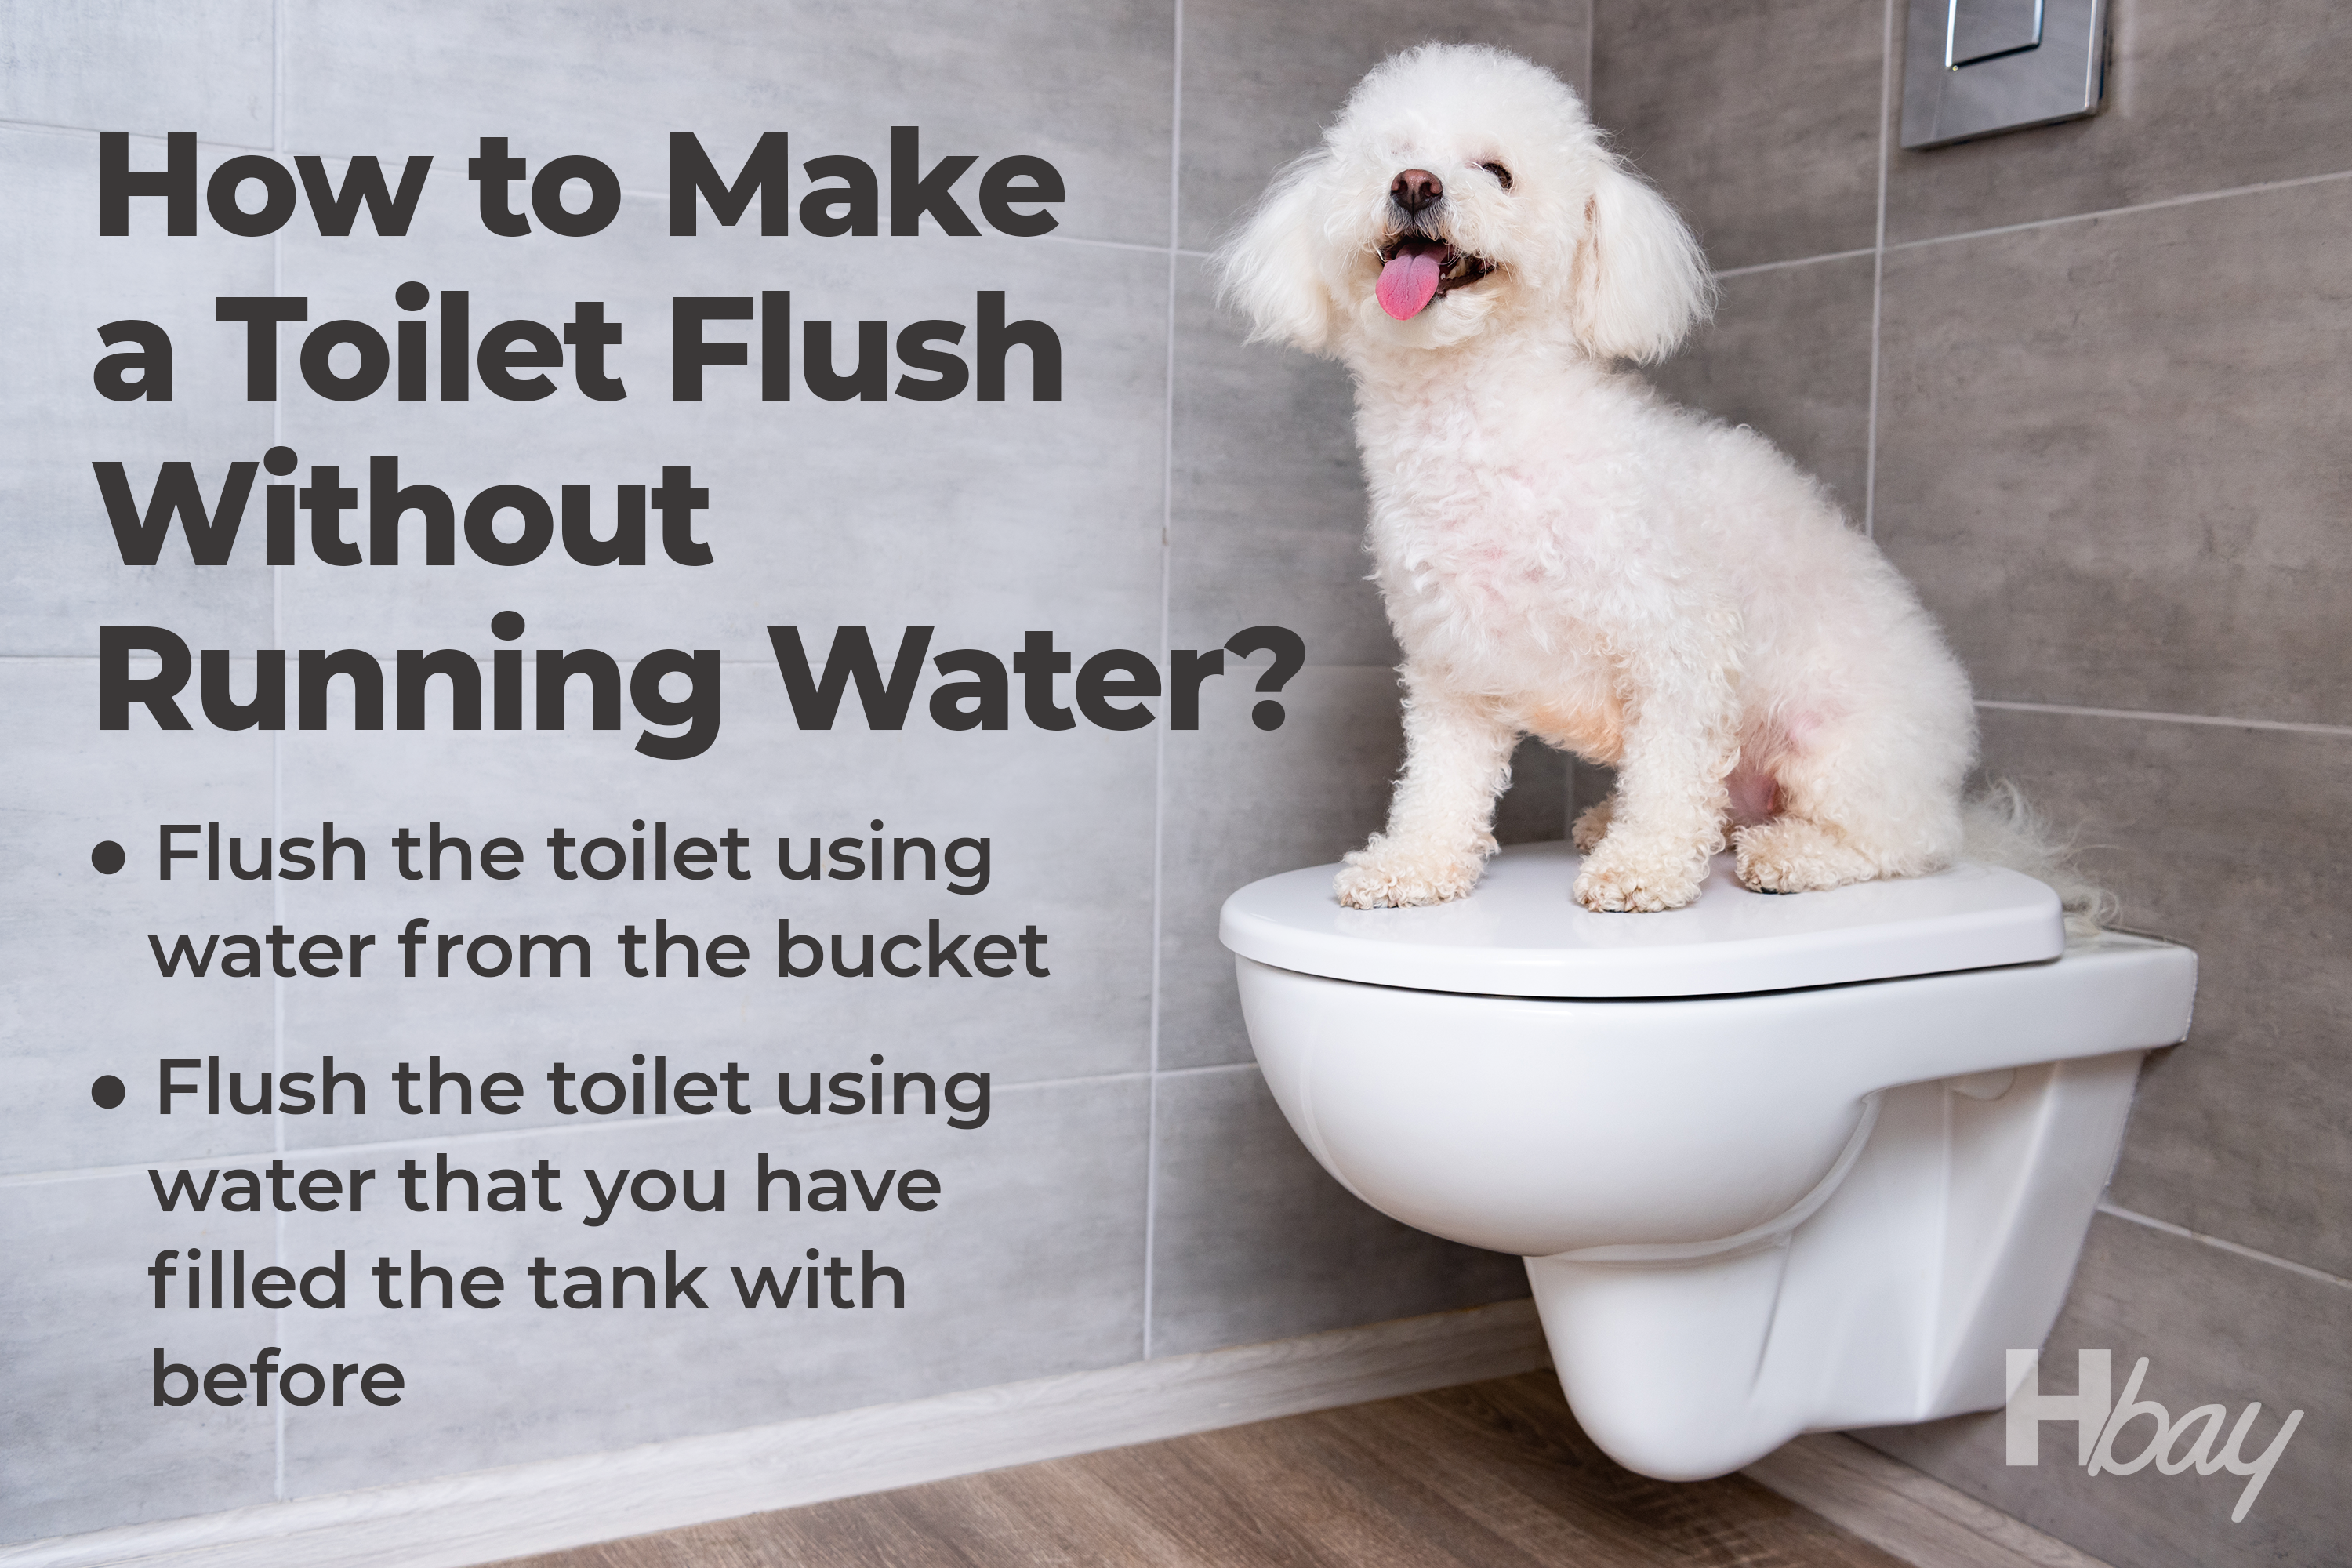 How to Make a Toilet Flush Without Running Water